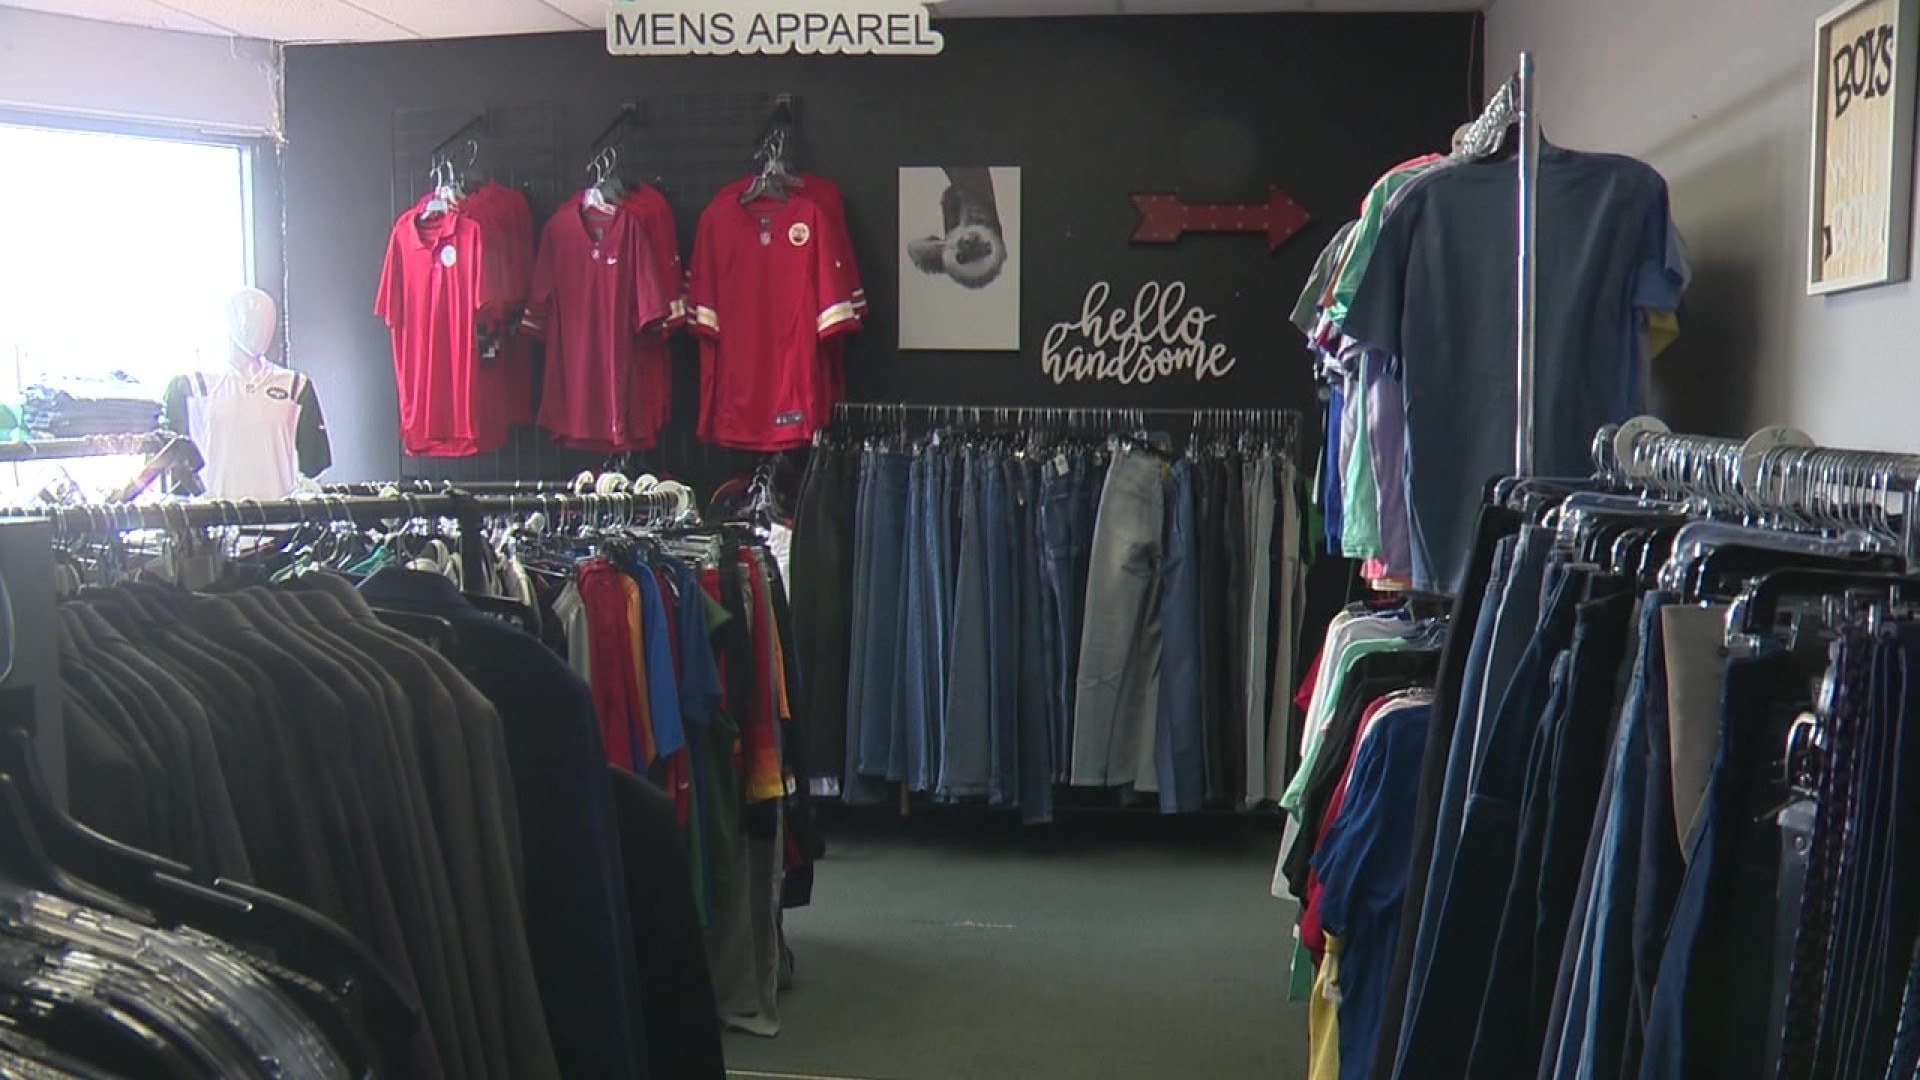 Nonprofit allows foster, trafficked youths to receive new clothes